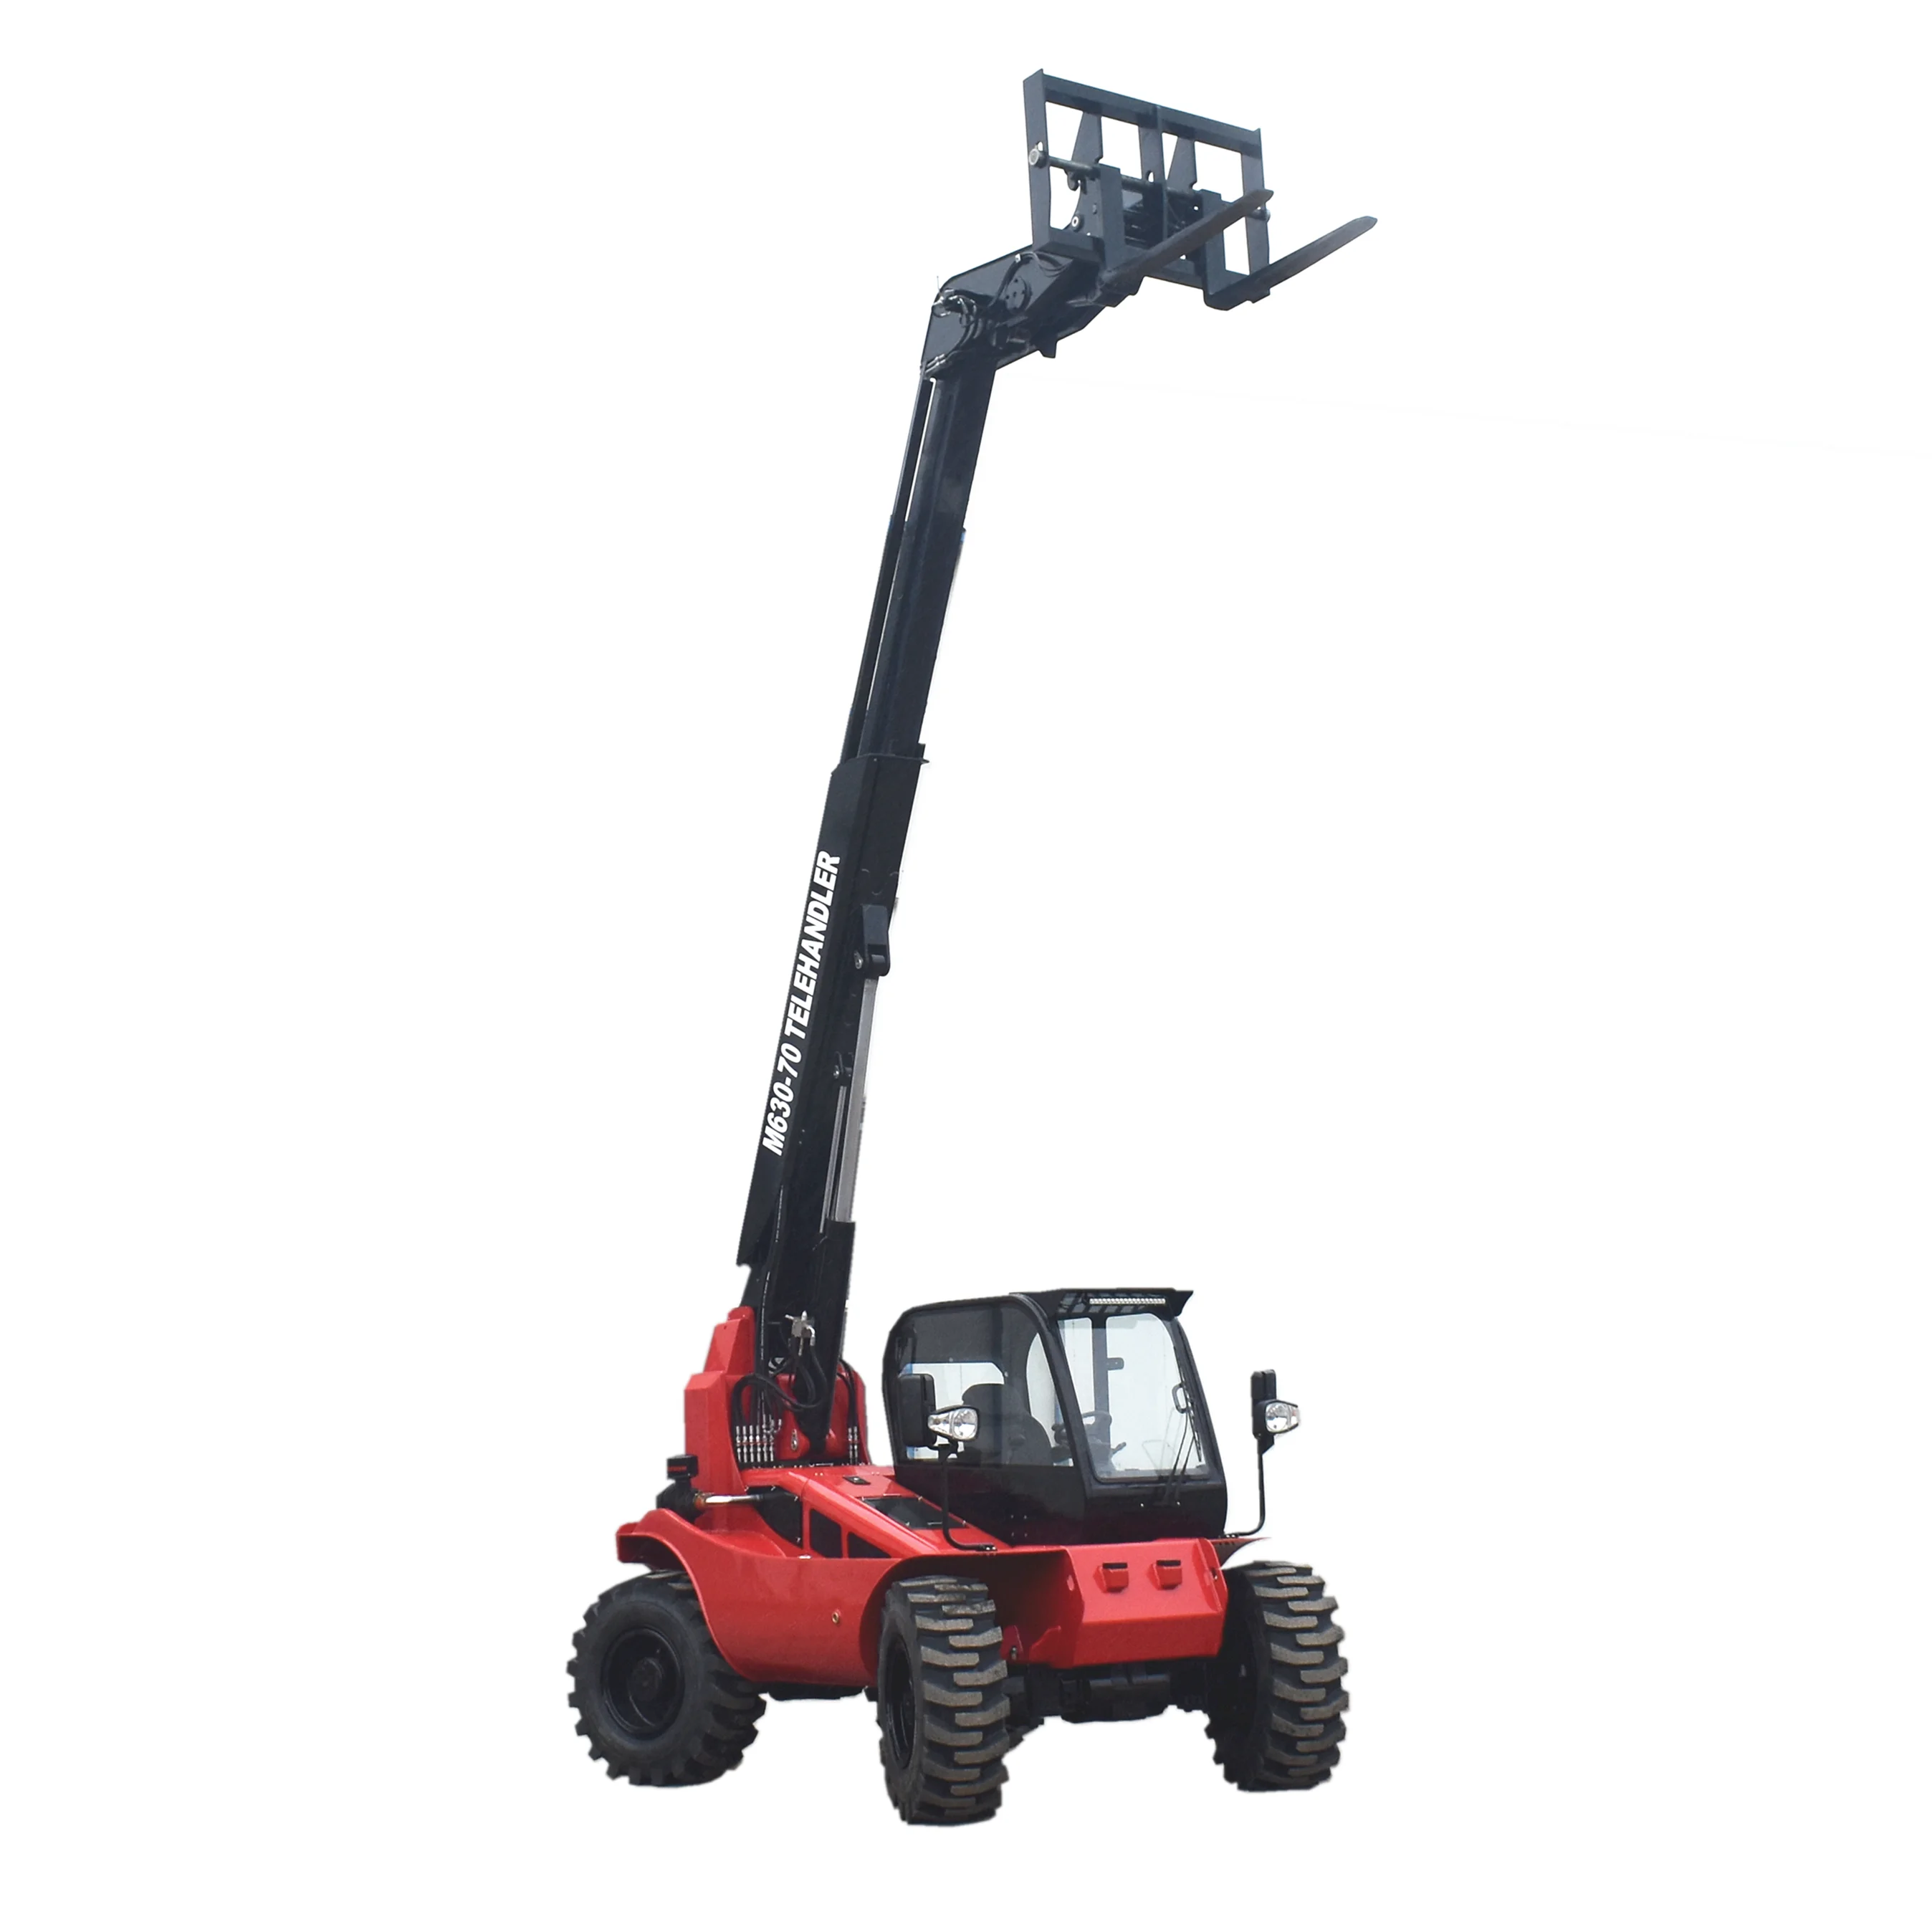 Container Loaded Euro 5 Epa Tier 4 China Small 4x4 Telehandler Forklift Telescopic Handler For Sale Buy Mini 4x4 Telescopic Forklift Handler Used Manitou Telehandler Jcb Telehandler Product On Alibaba Com